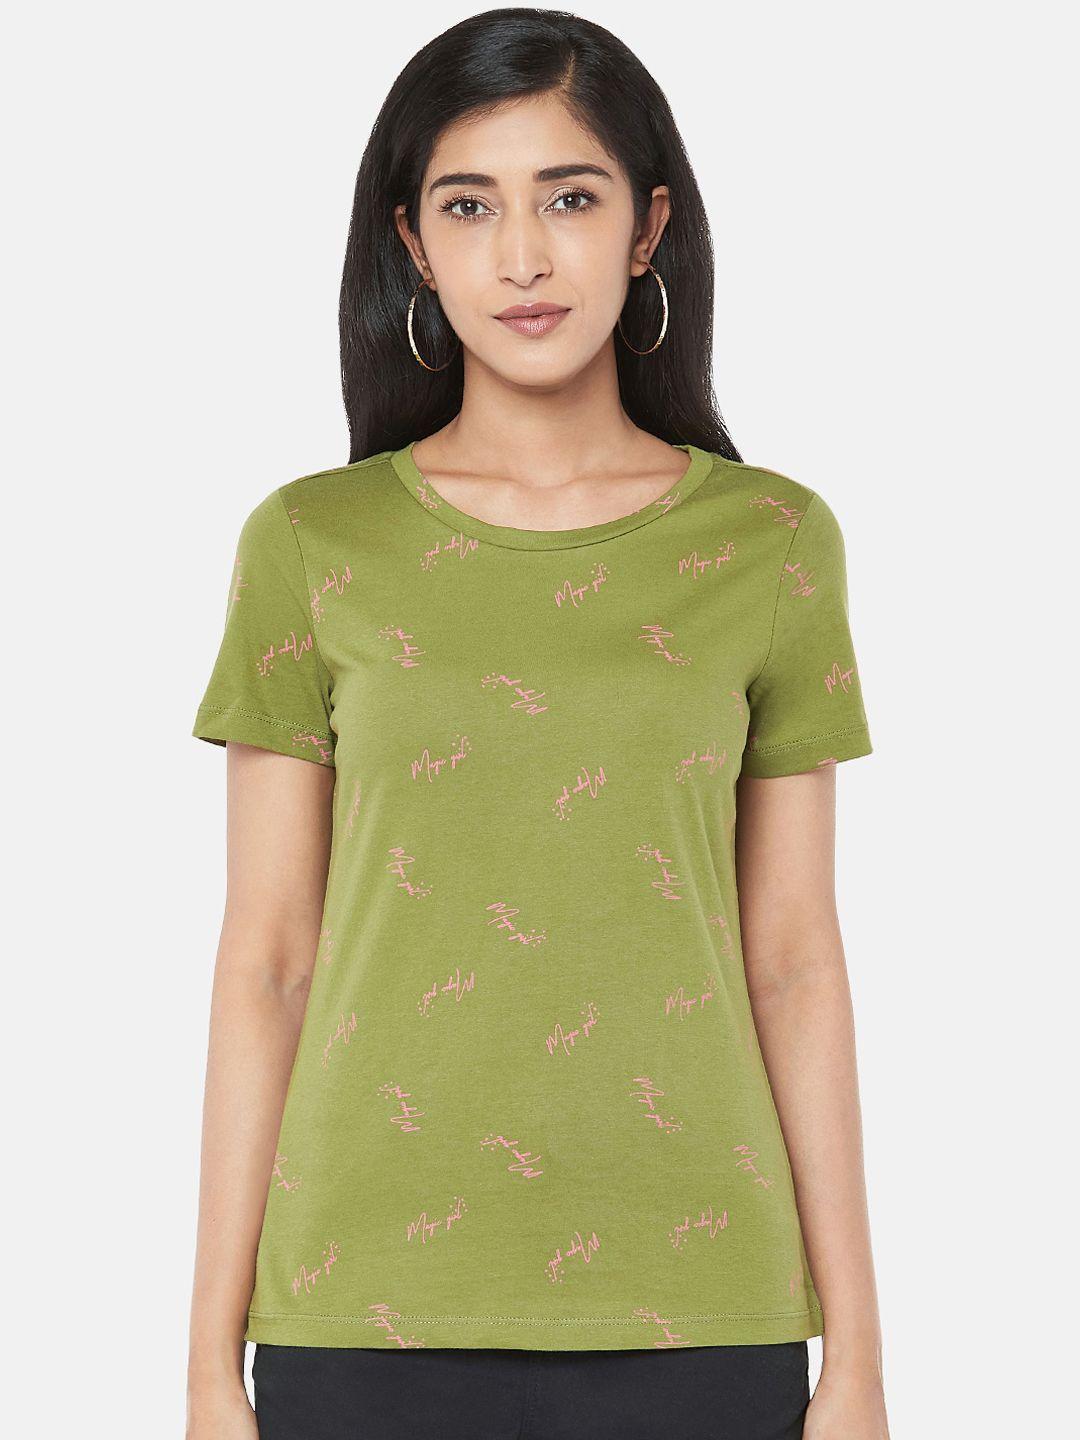 honey by pantaloons women olive green printed round neck t-shirt